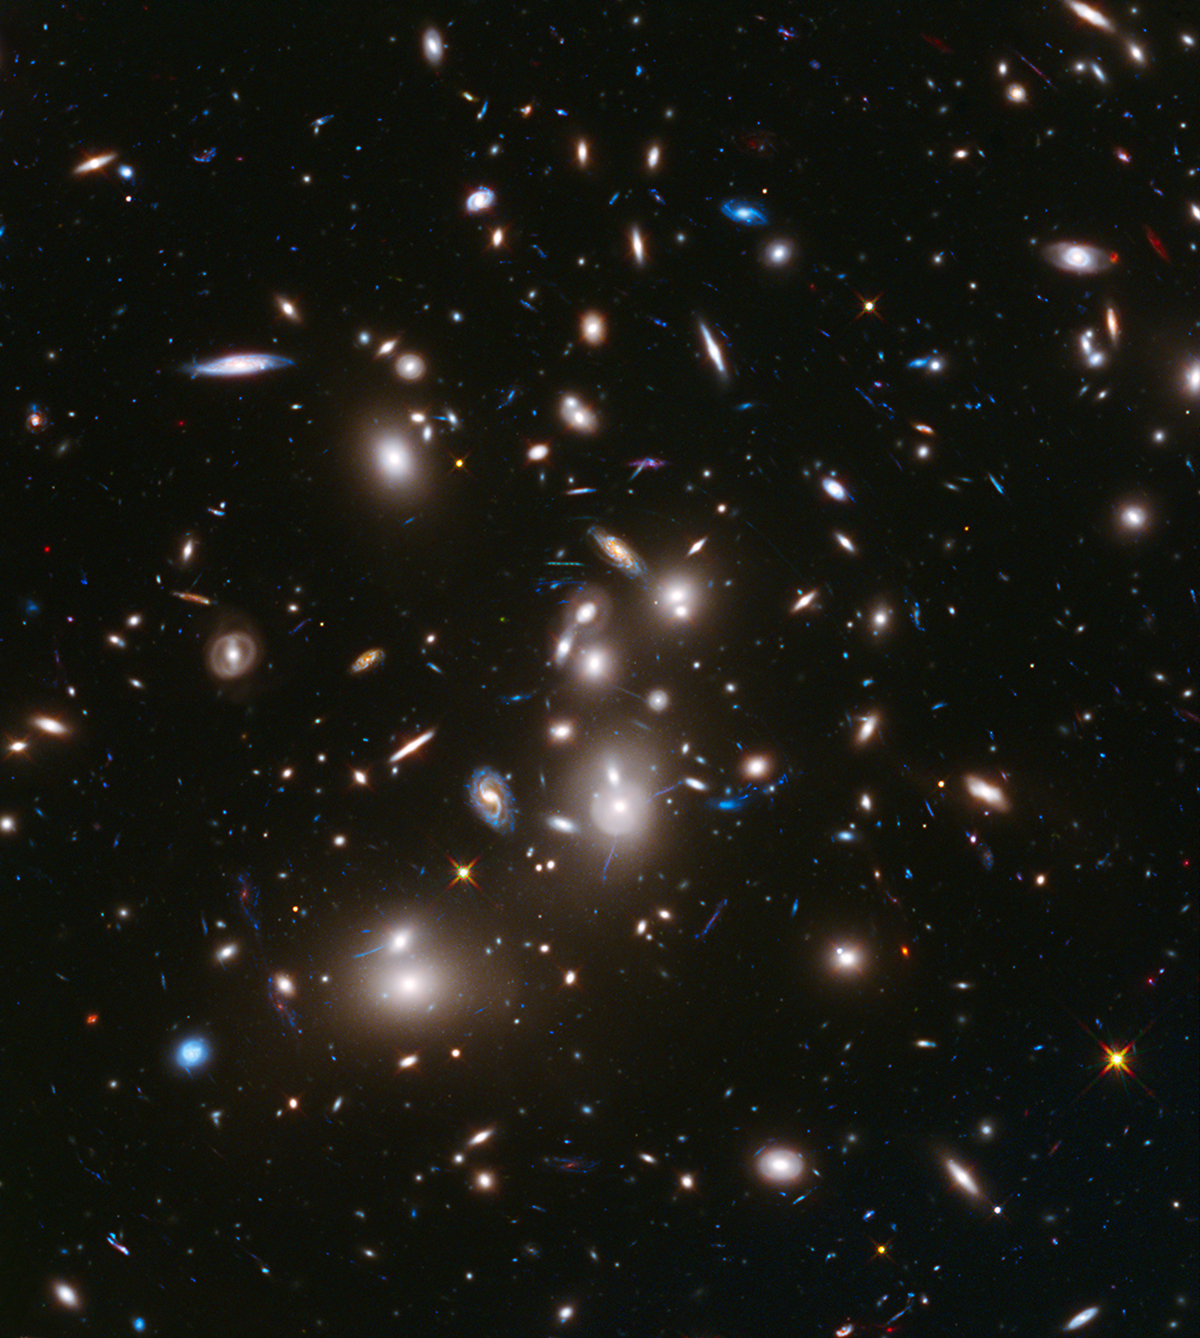 may-24-2019-galaxy-cluster-abell-2744.jpg